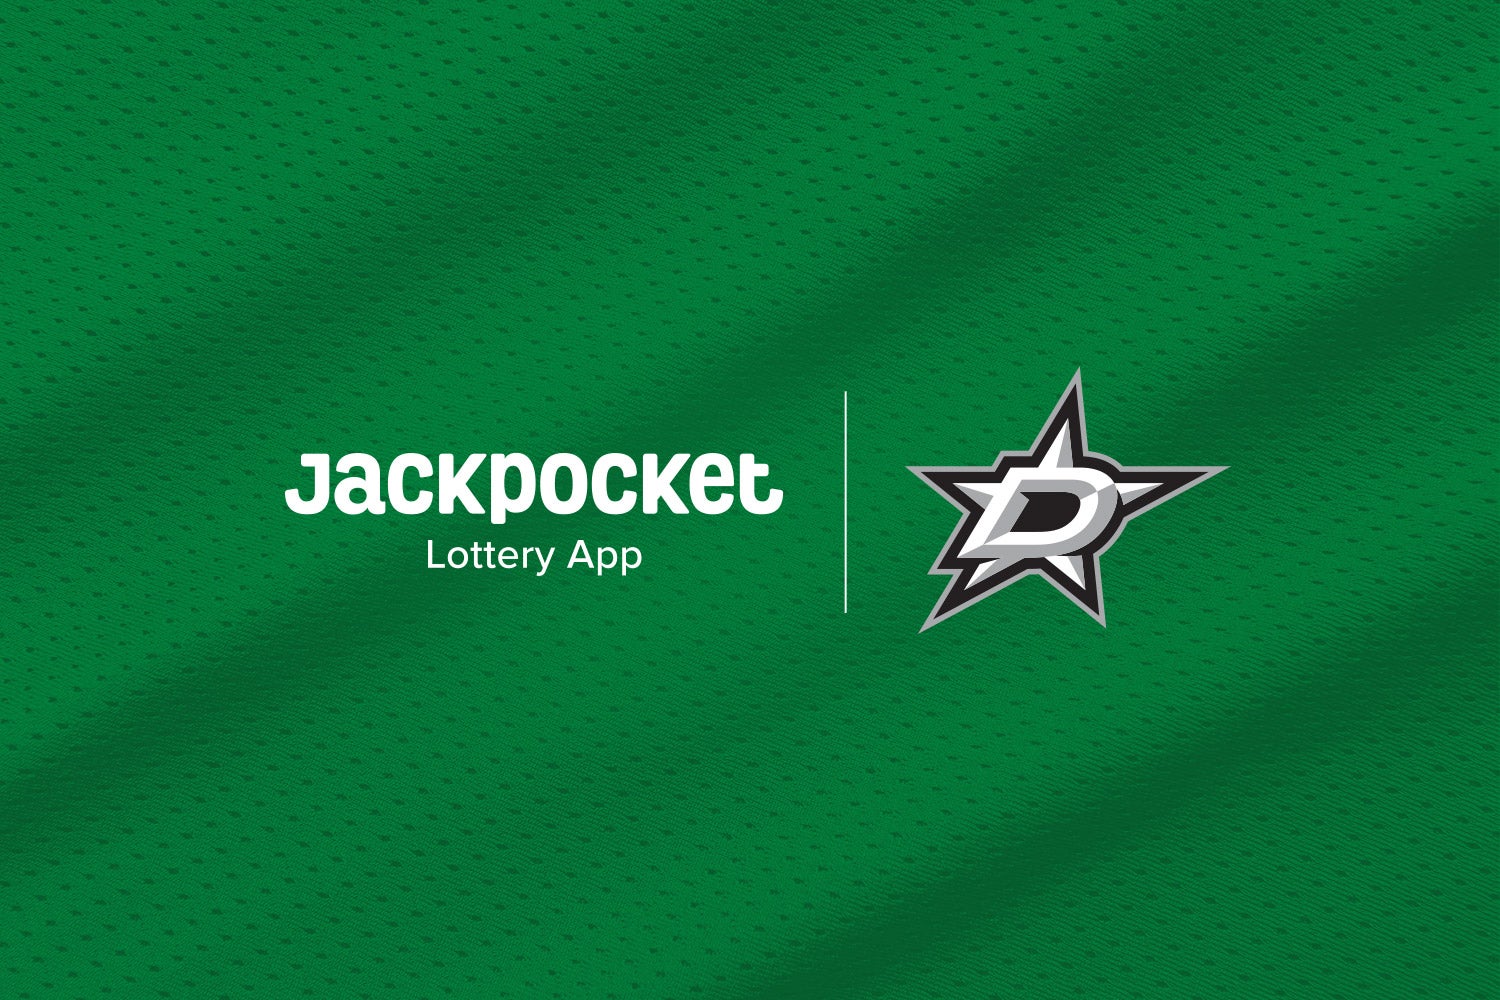 Jackpocket is the Dallas Stars Official Digital Lottery Courier Partner